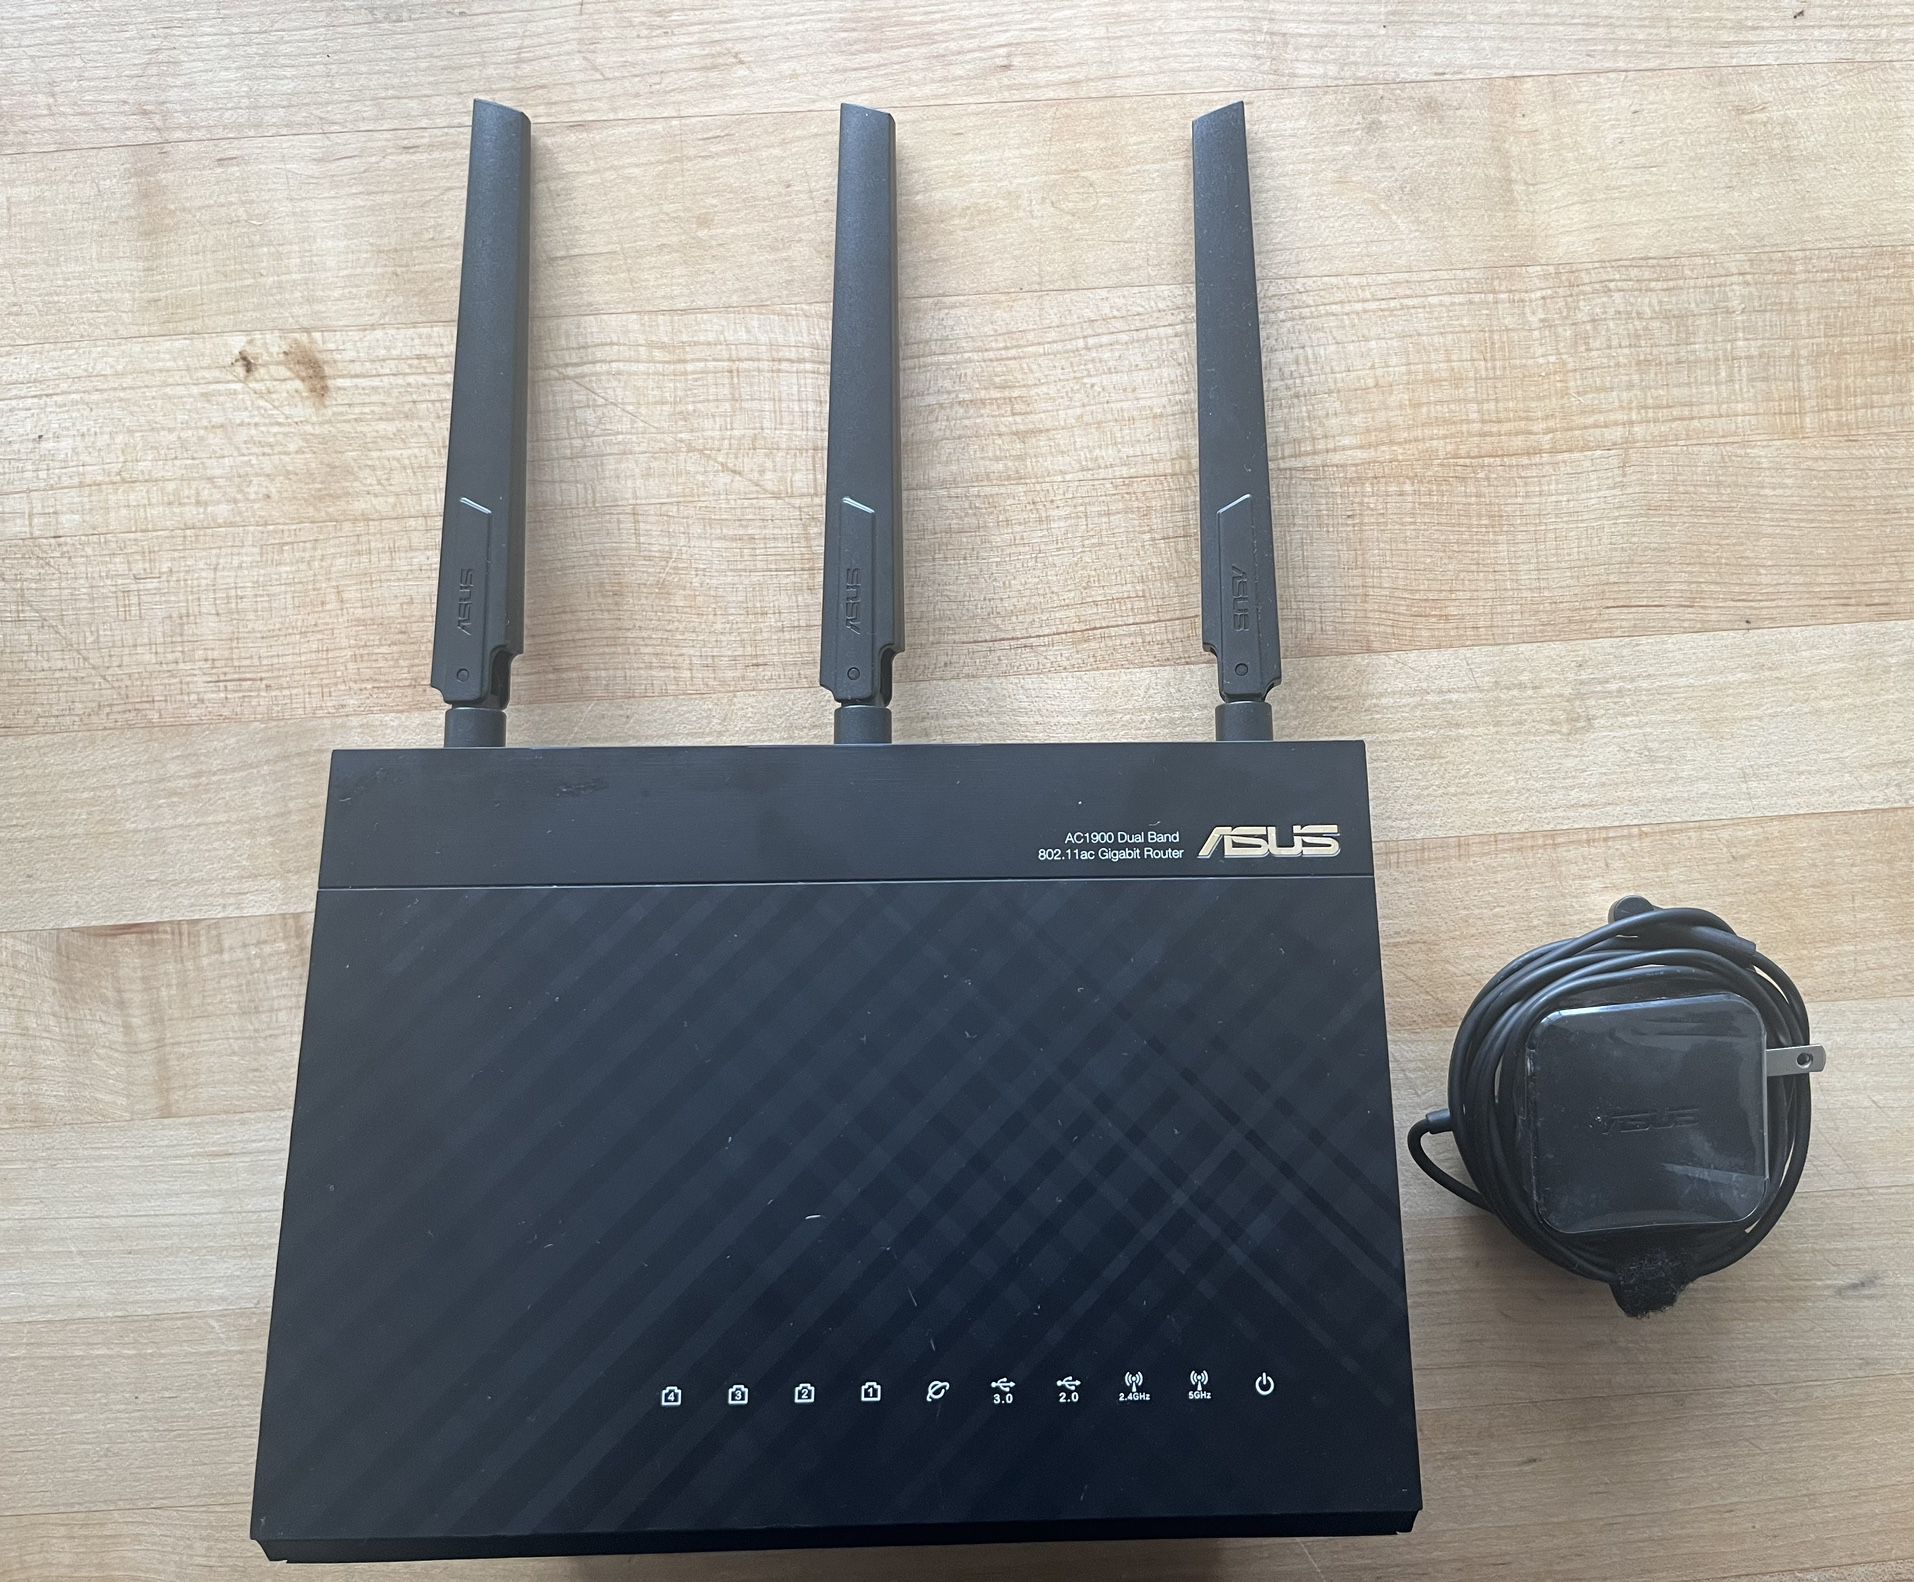 Asus AC1900p WiFi Router